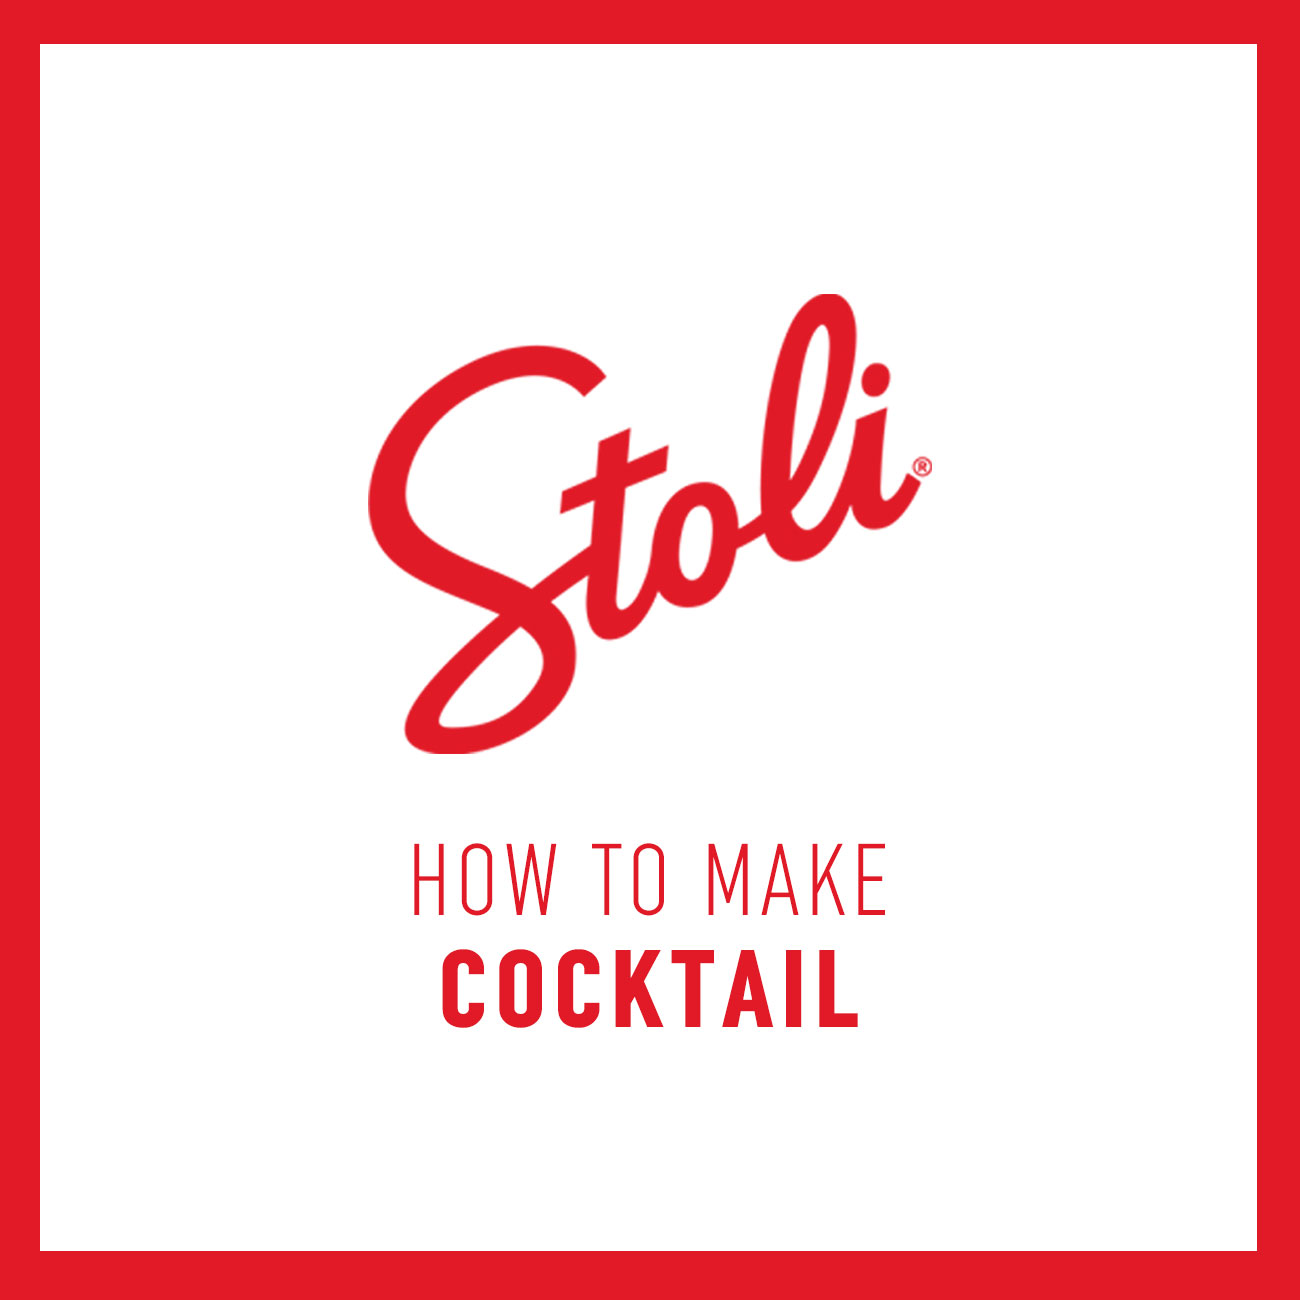 MY STOLI VIDEOS WITH COCKTAILS